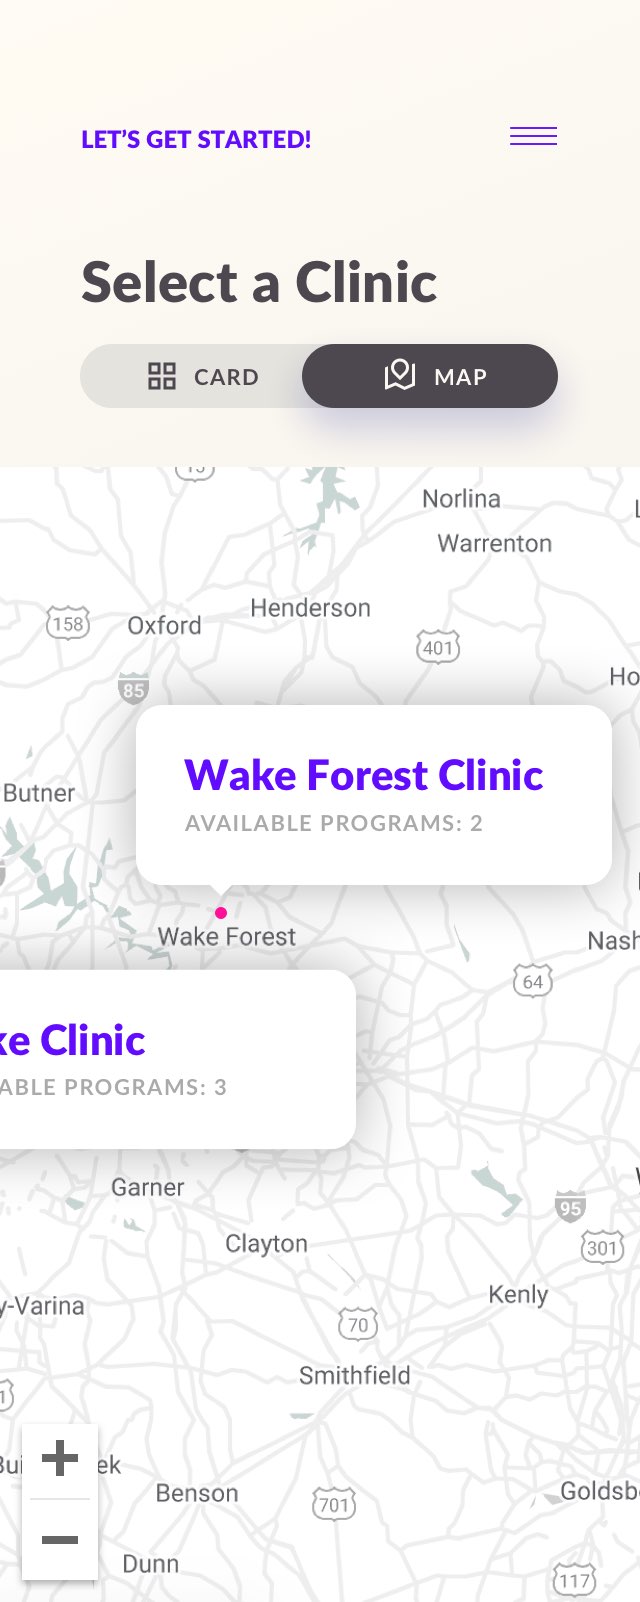 Apply_Select Clinic—map@2x